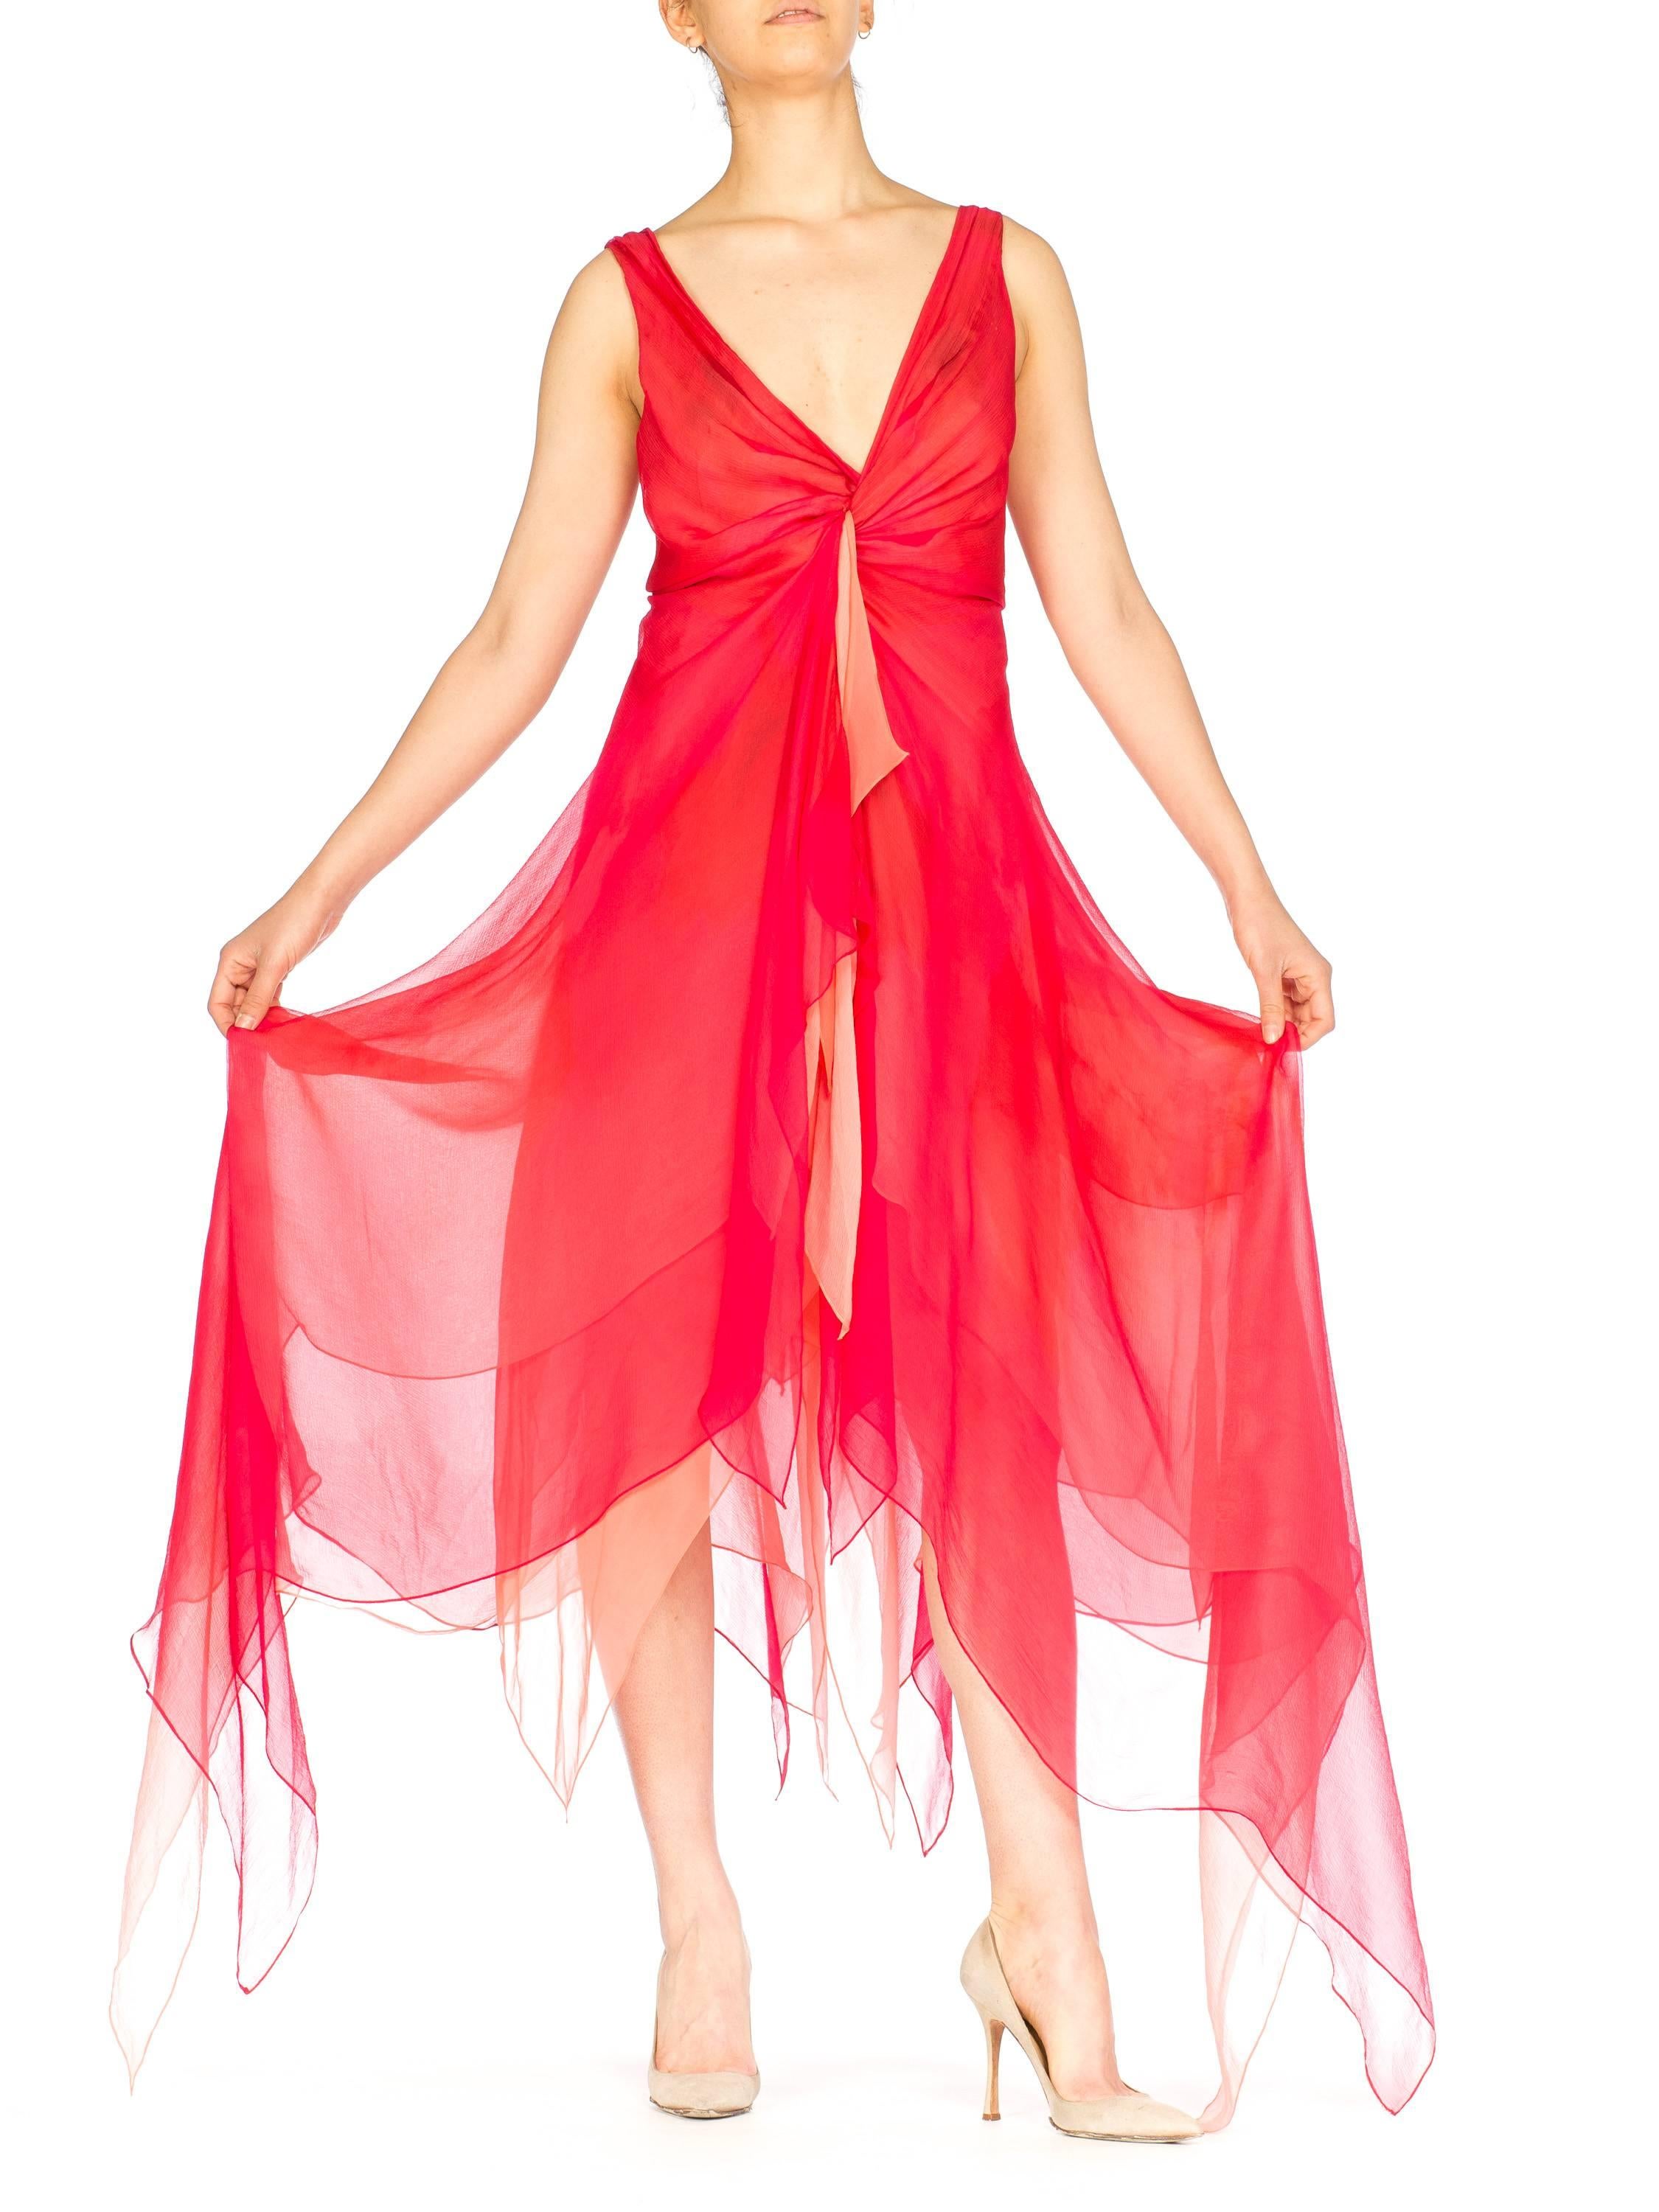 Donna Karan Layers of Red and Pink Chiffon Gown, 1990s  5